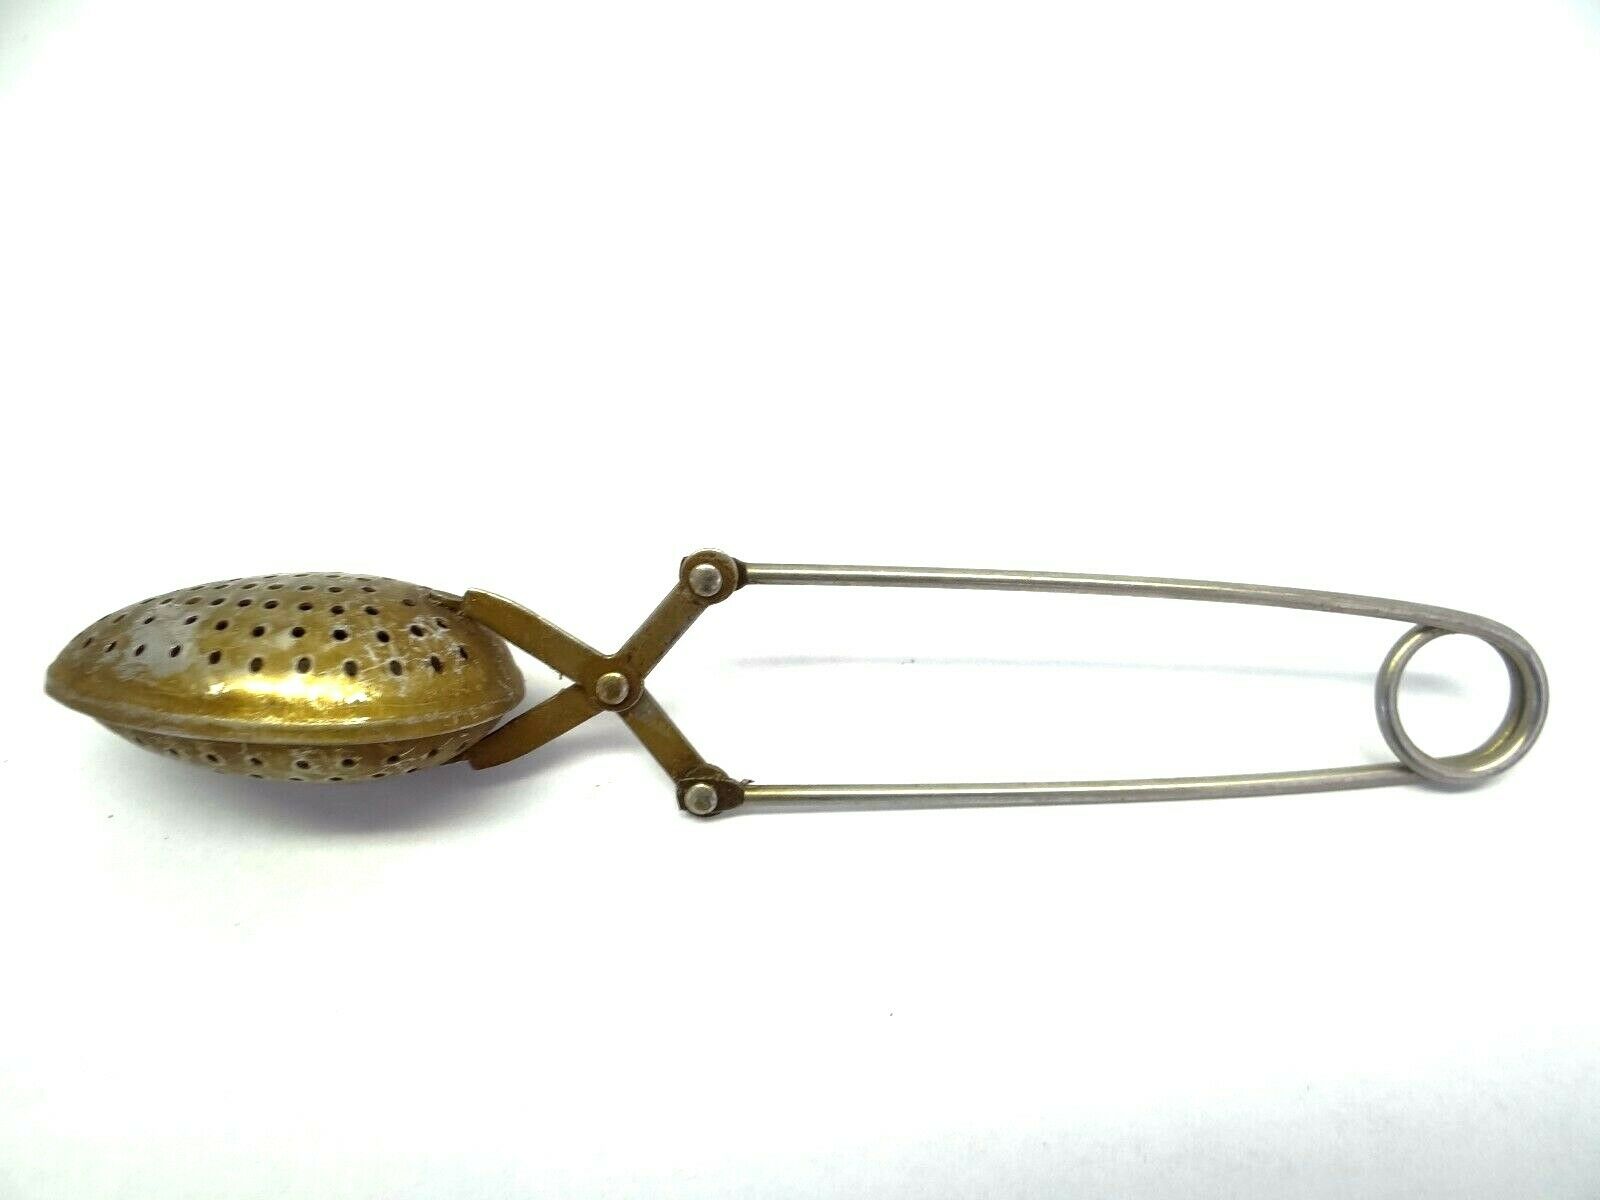 Vintage Old Accordion Style Spring Tea Ball Strainer Steeper Tongs Spoon Kitchen